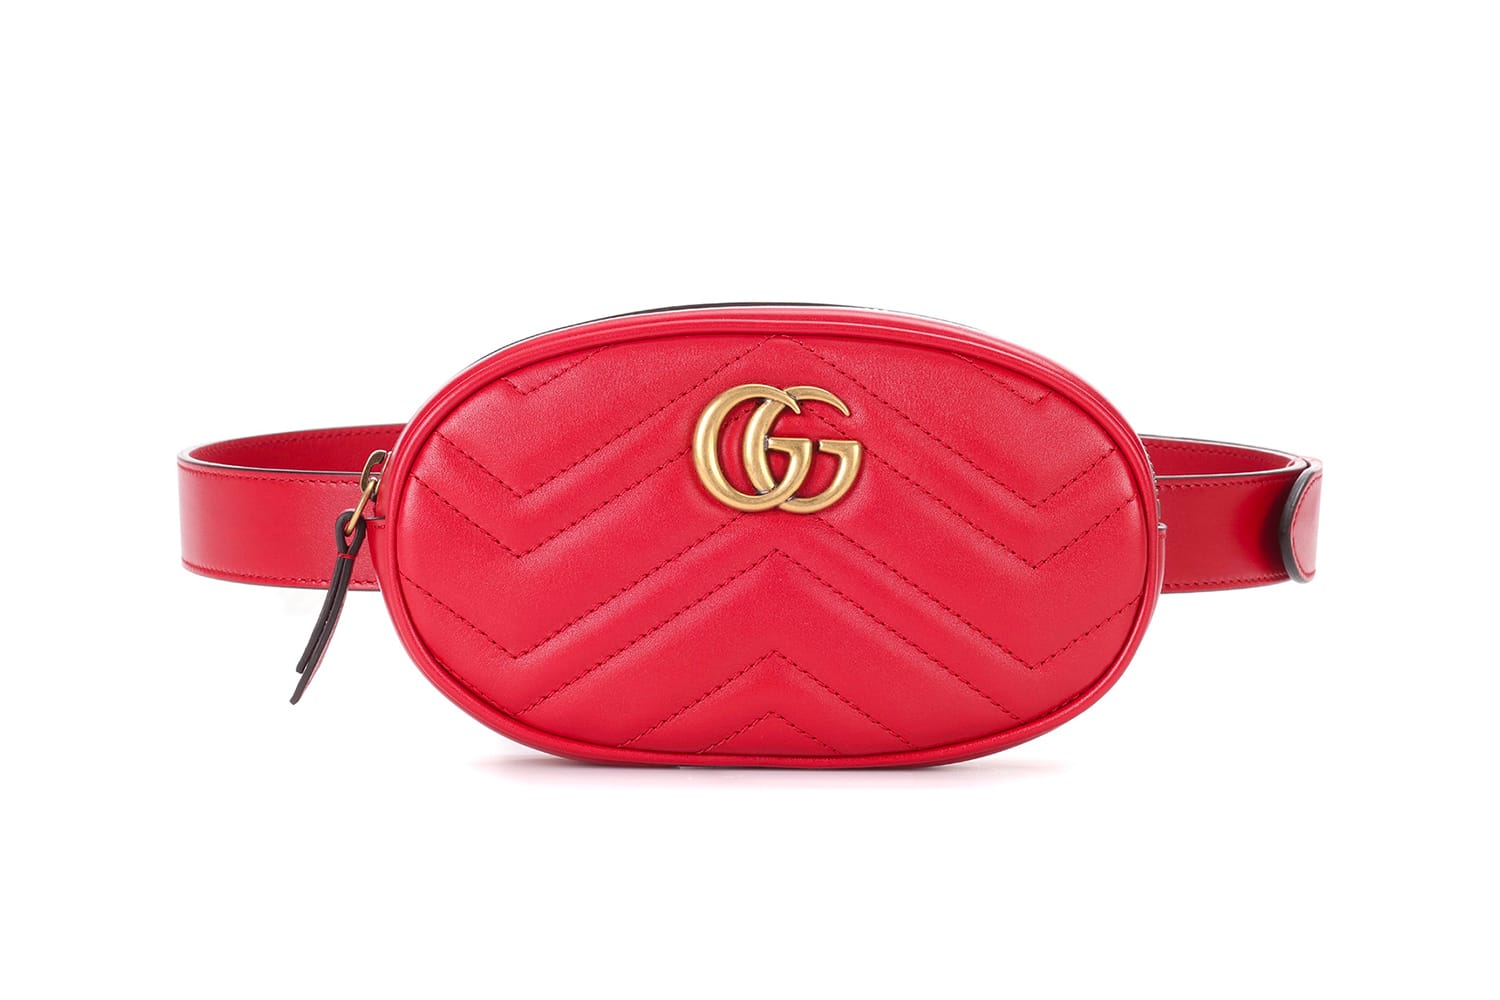 Dionysus chain wallet leather crossbody bag Gucci Red in Leather - 40906989